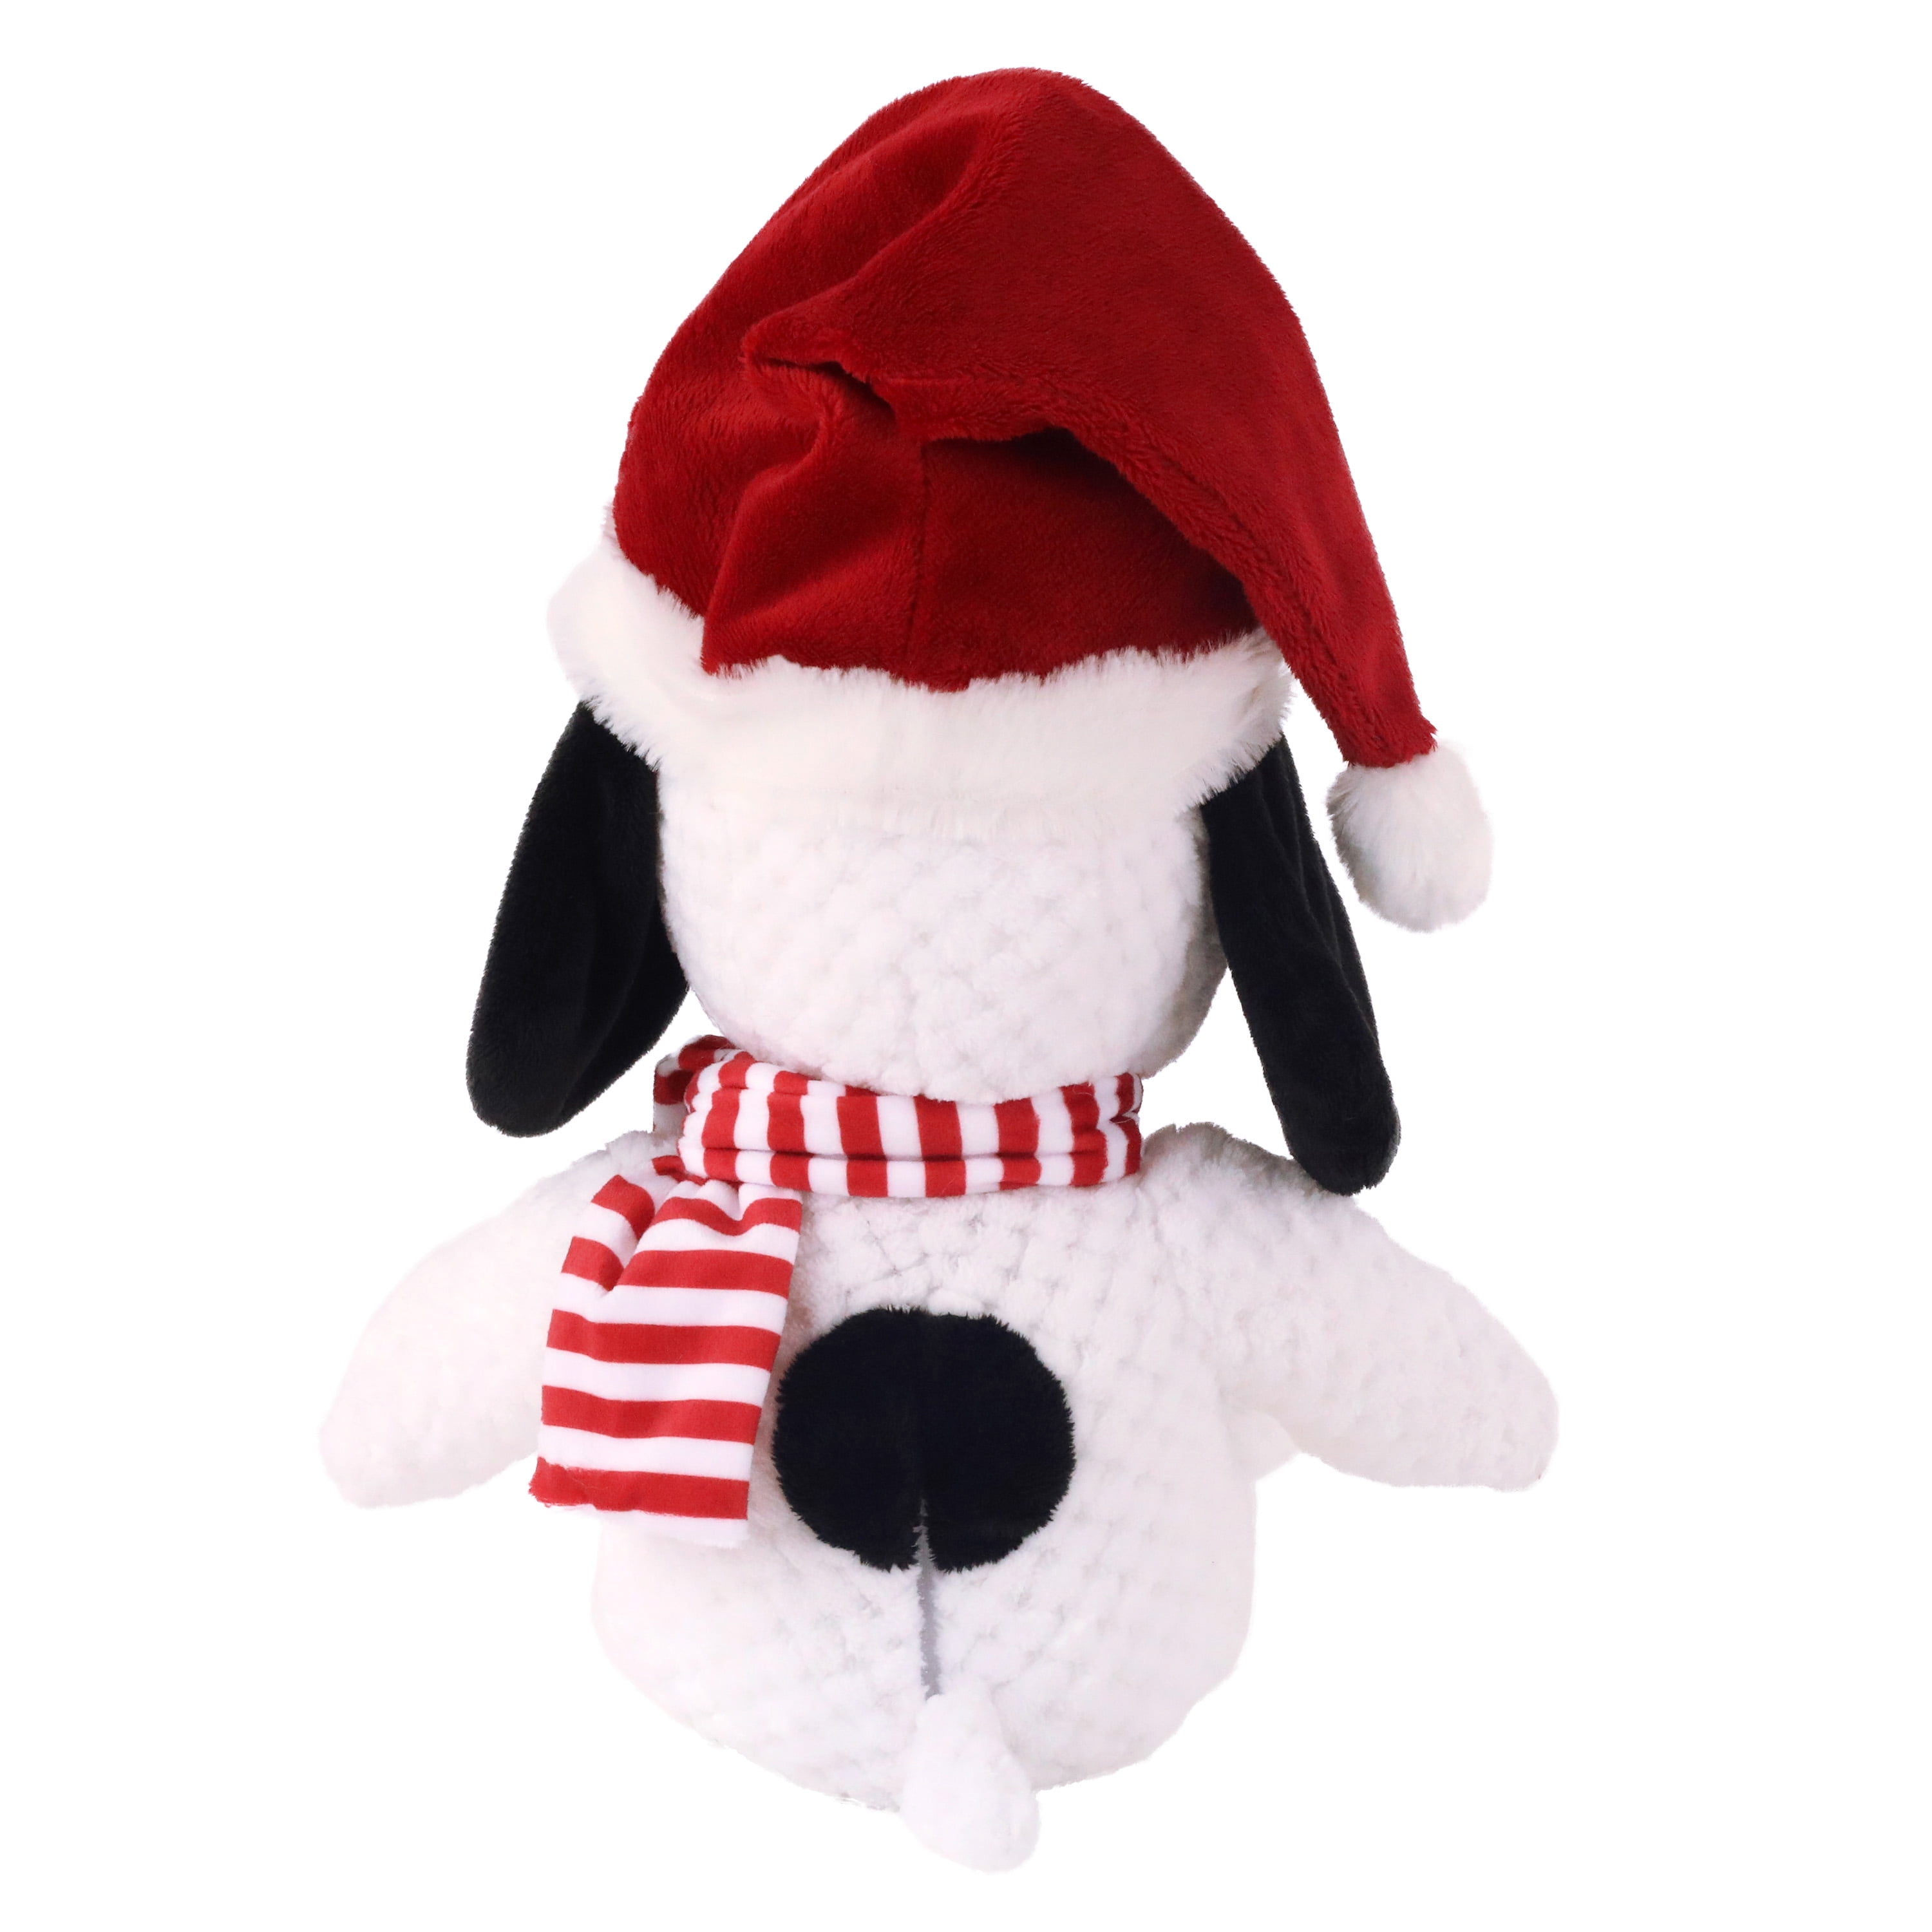 9.06 in. Animated Plush LightShow Snoopy with Present 15251 - The